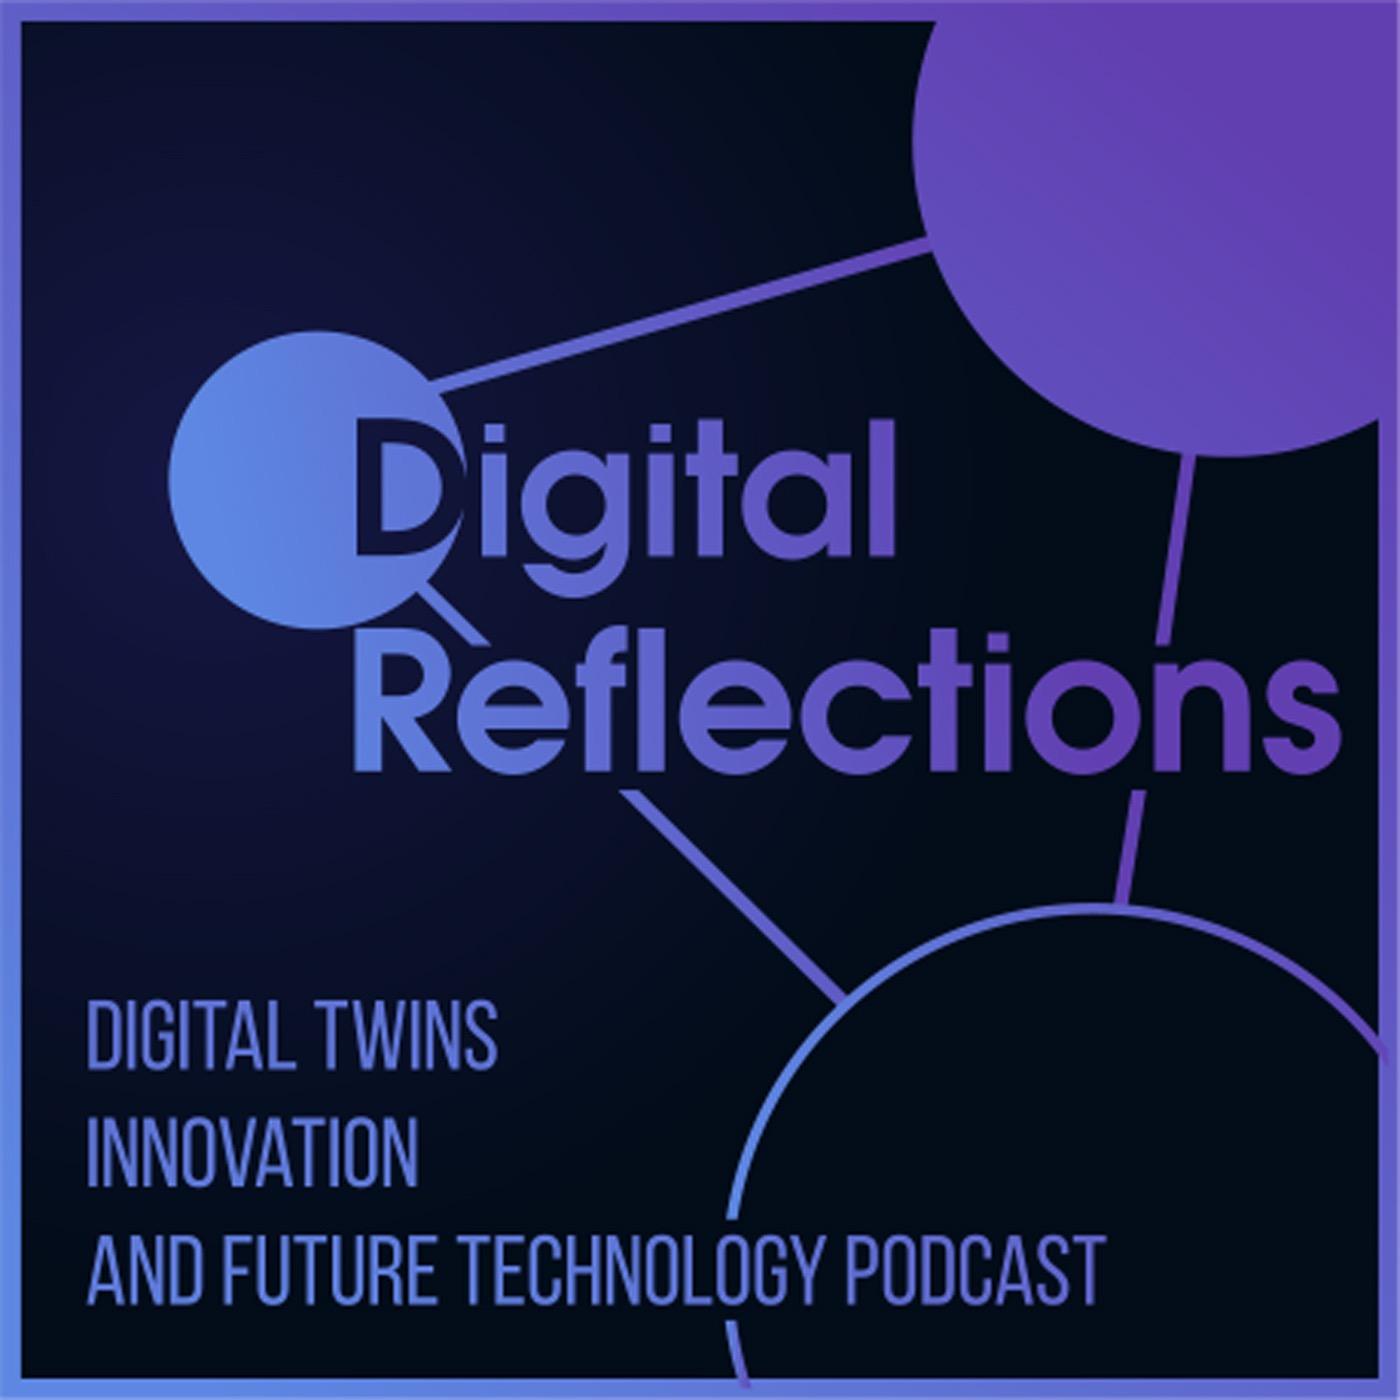 Digital Reflections - Digital Twins, Innovation, and Future Technology Podcast